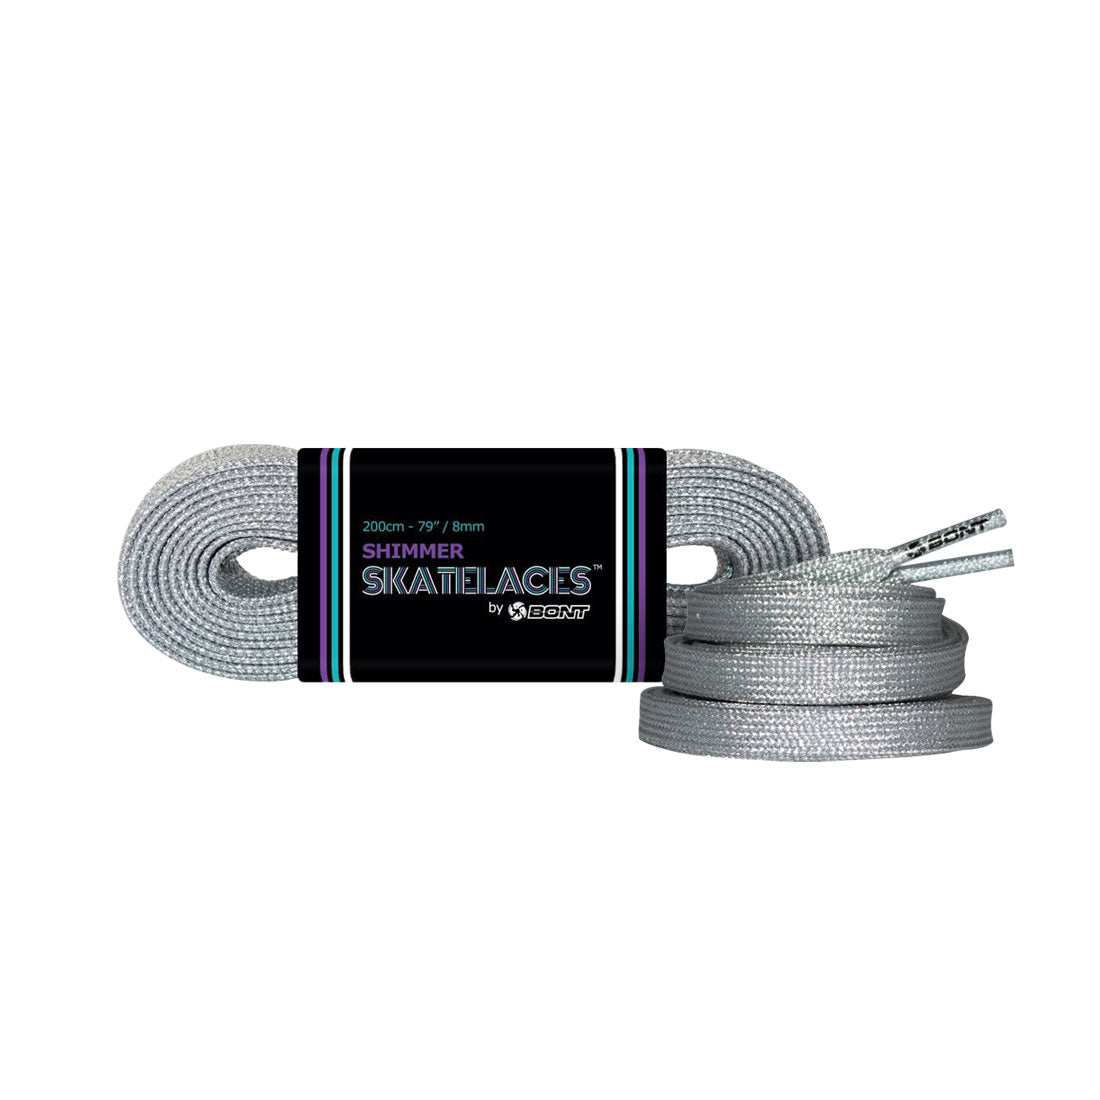 Bont Shimmer 8mm Laces - 275cm/108in Cyborg Silver Laces